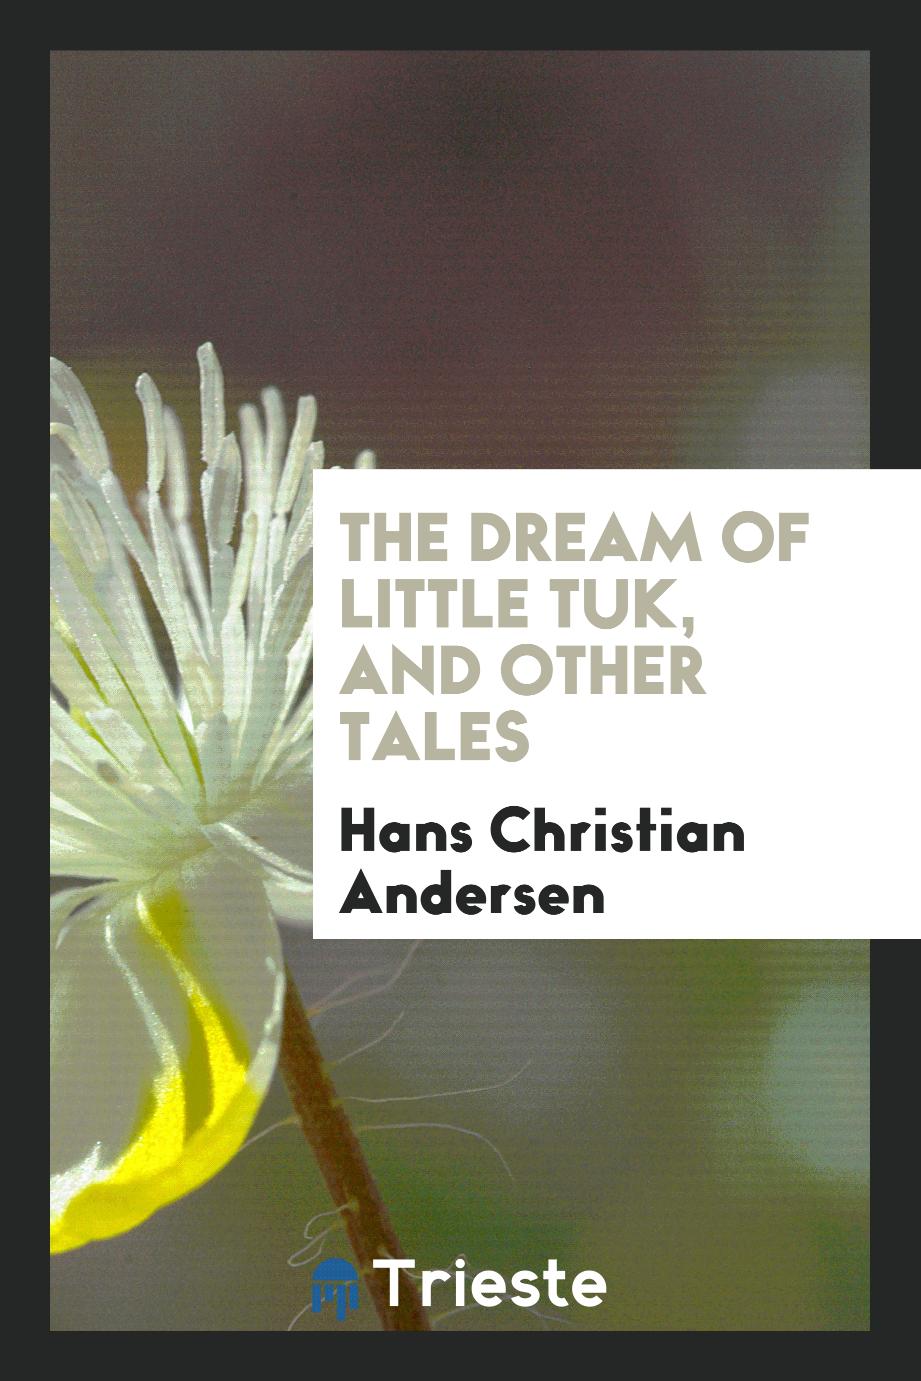 Hans Christian Andersen - The Dream of Little Tuk, and Other Tales